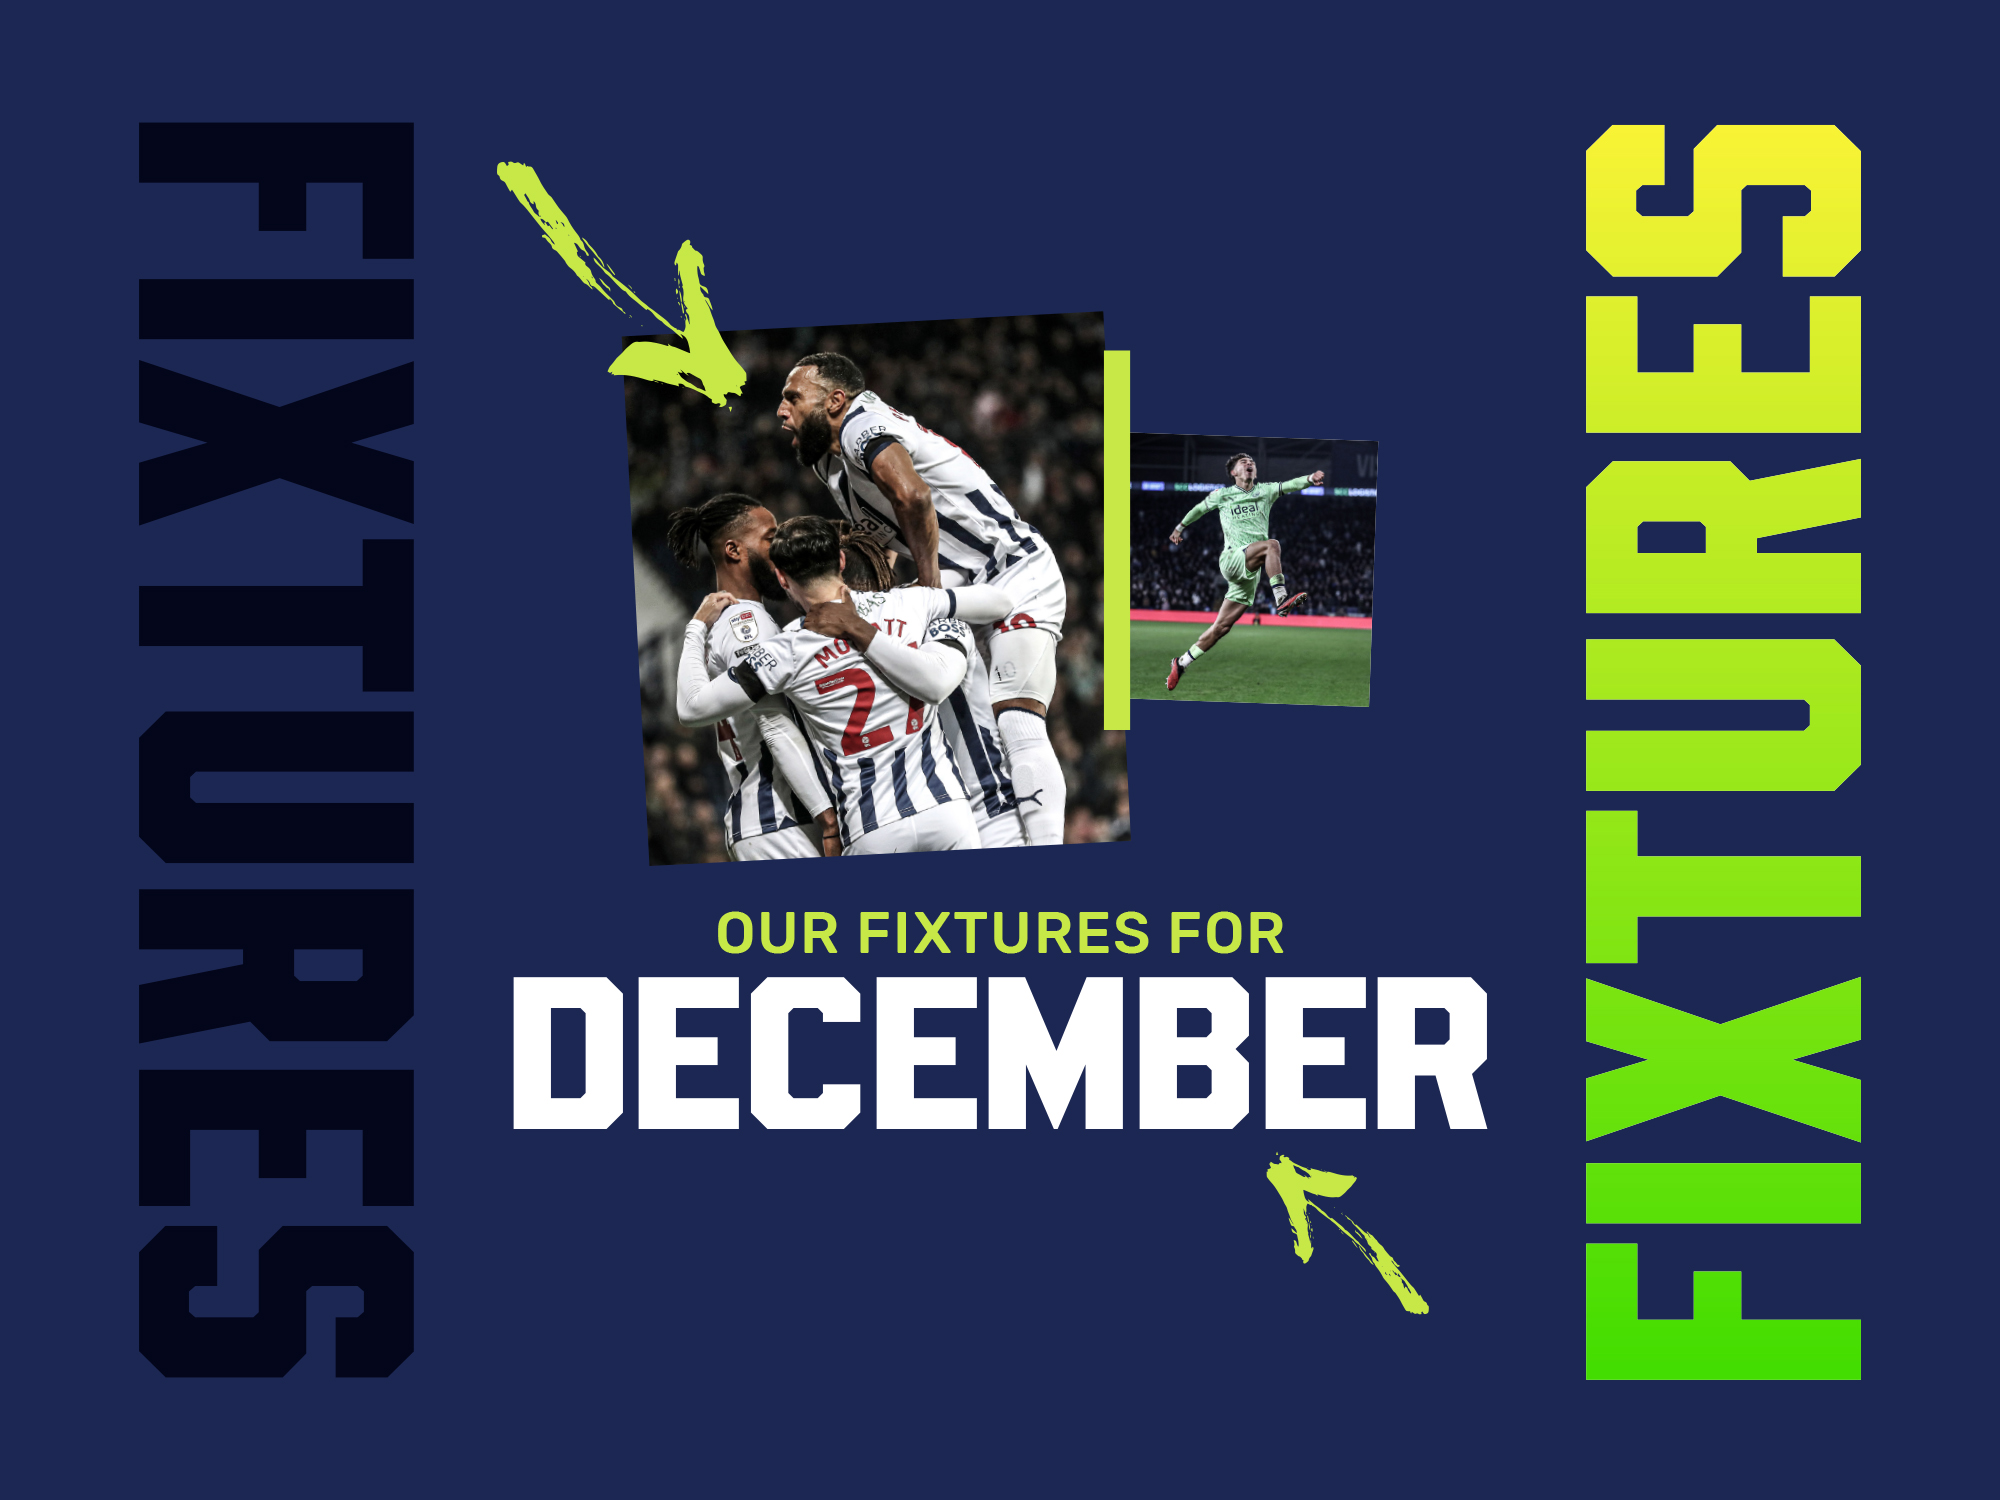 Albion's December fixtures graphic with a team celebration pic and an image of Jeremy Sarmiento scoring against Cardiff City